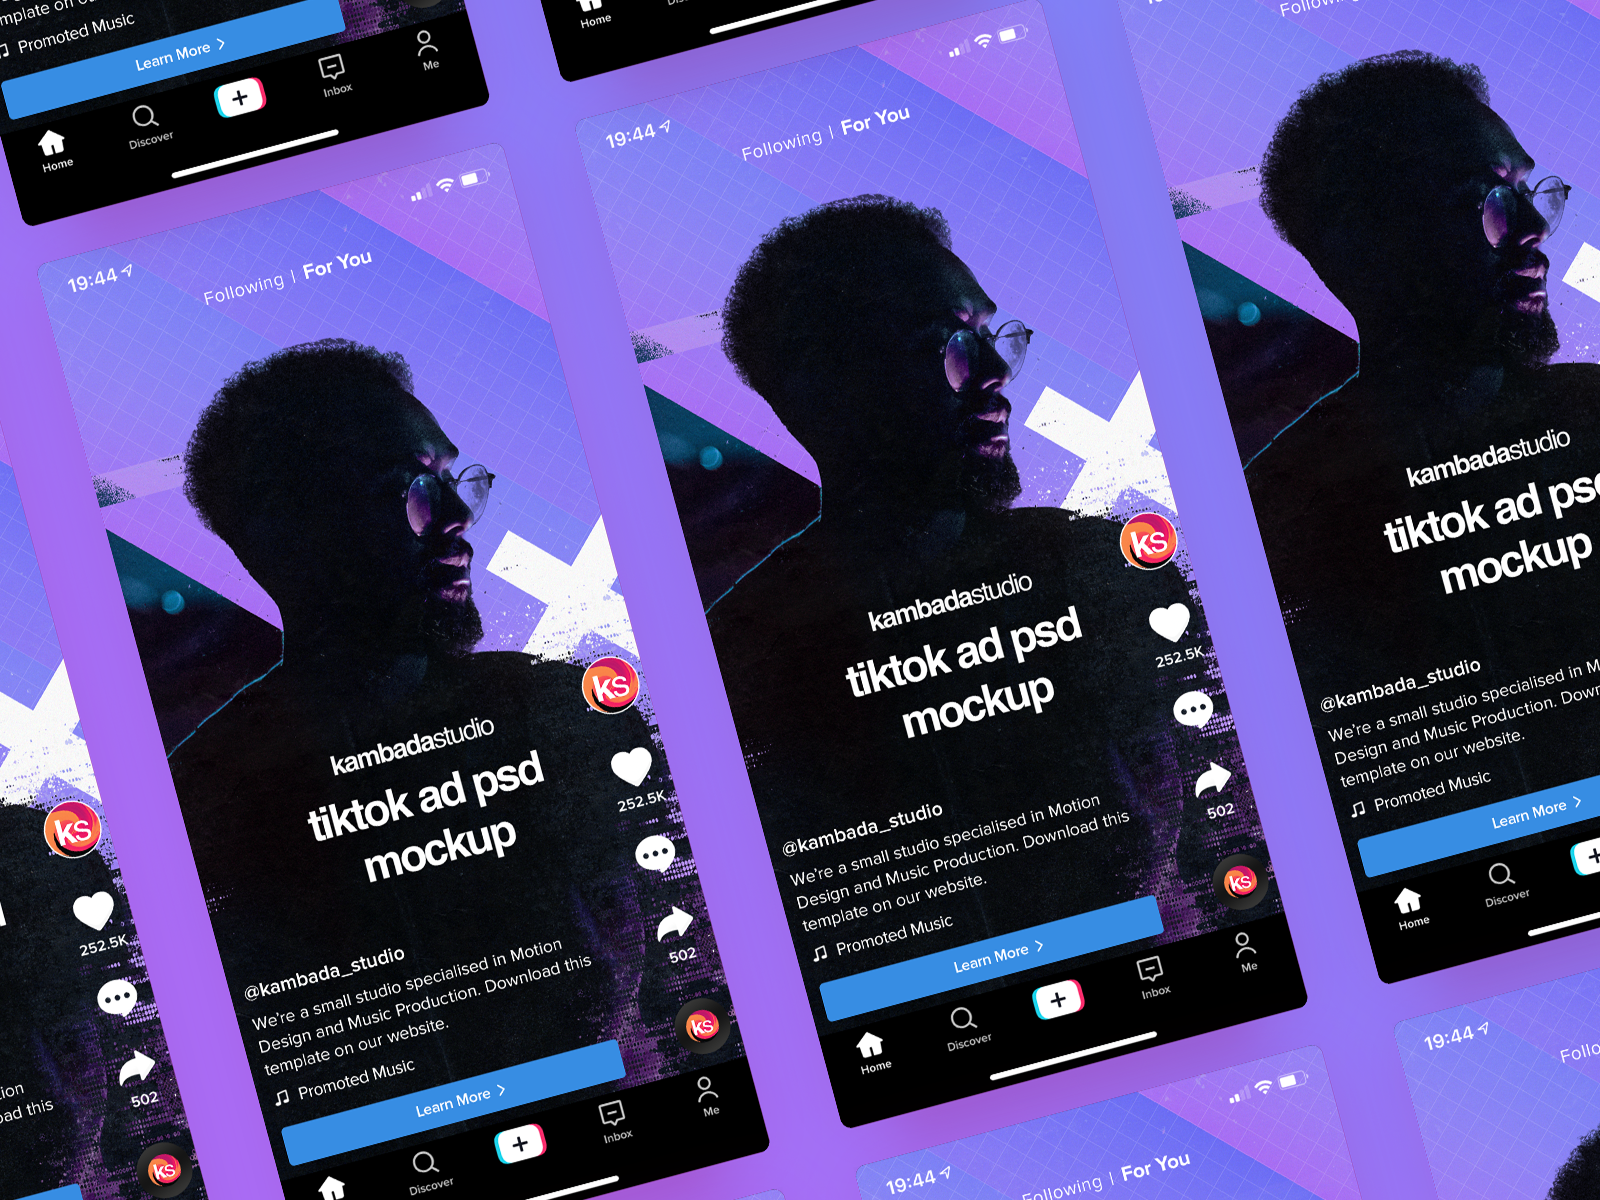 Download TikTok Ad Mockup (Free PSD file) by Gil Peres on Dribbble